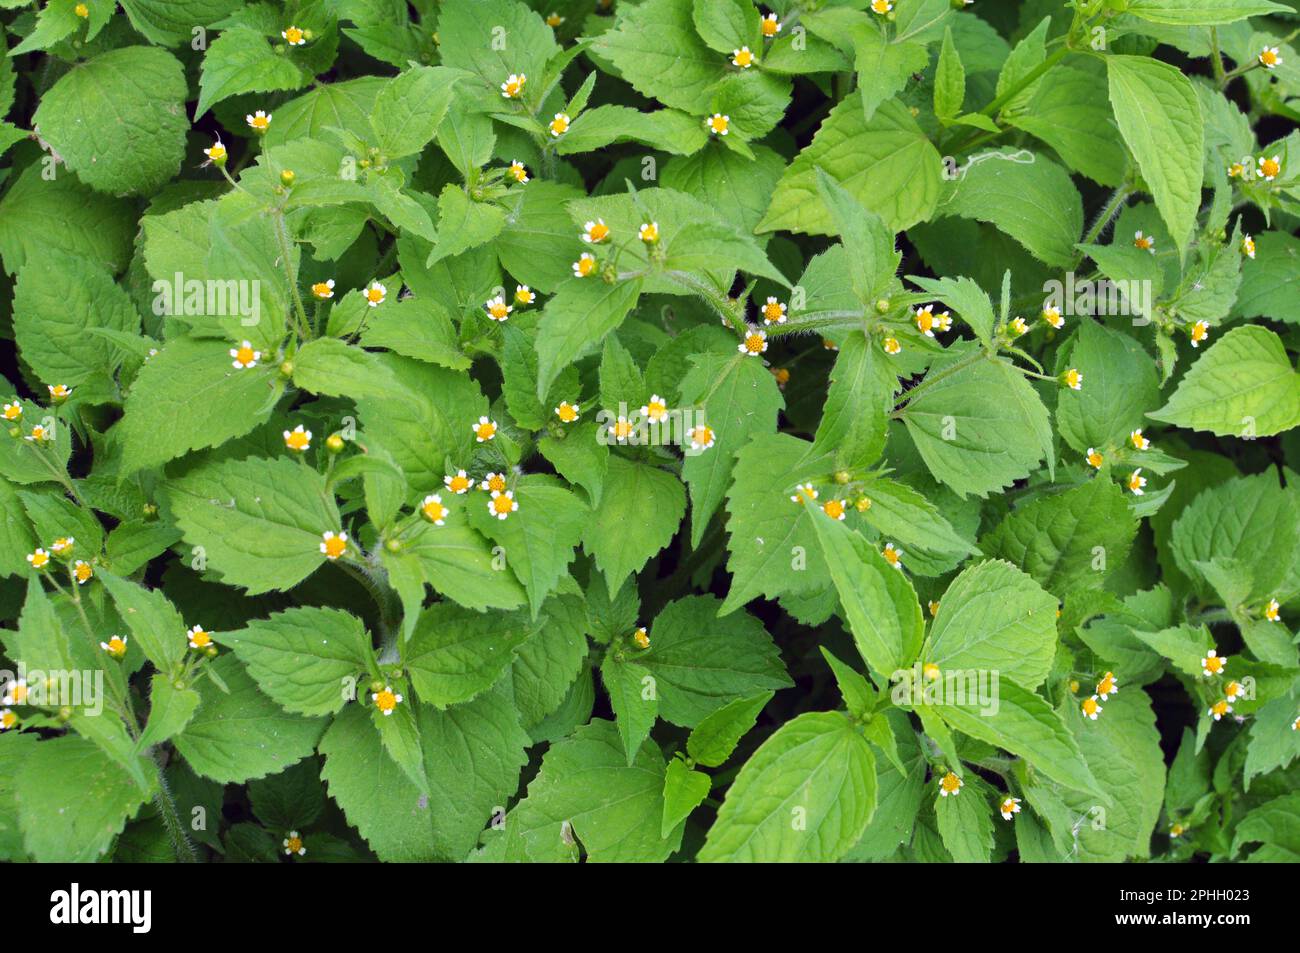 One of the weed species blooms in the field - galinsoga parviflora Stock Photo